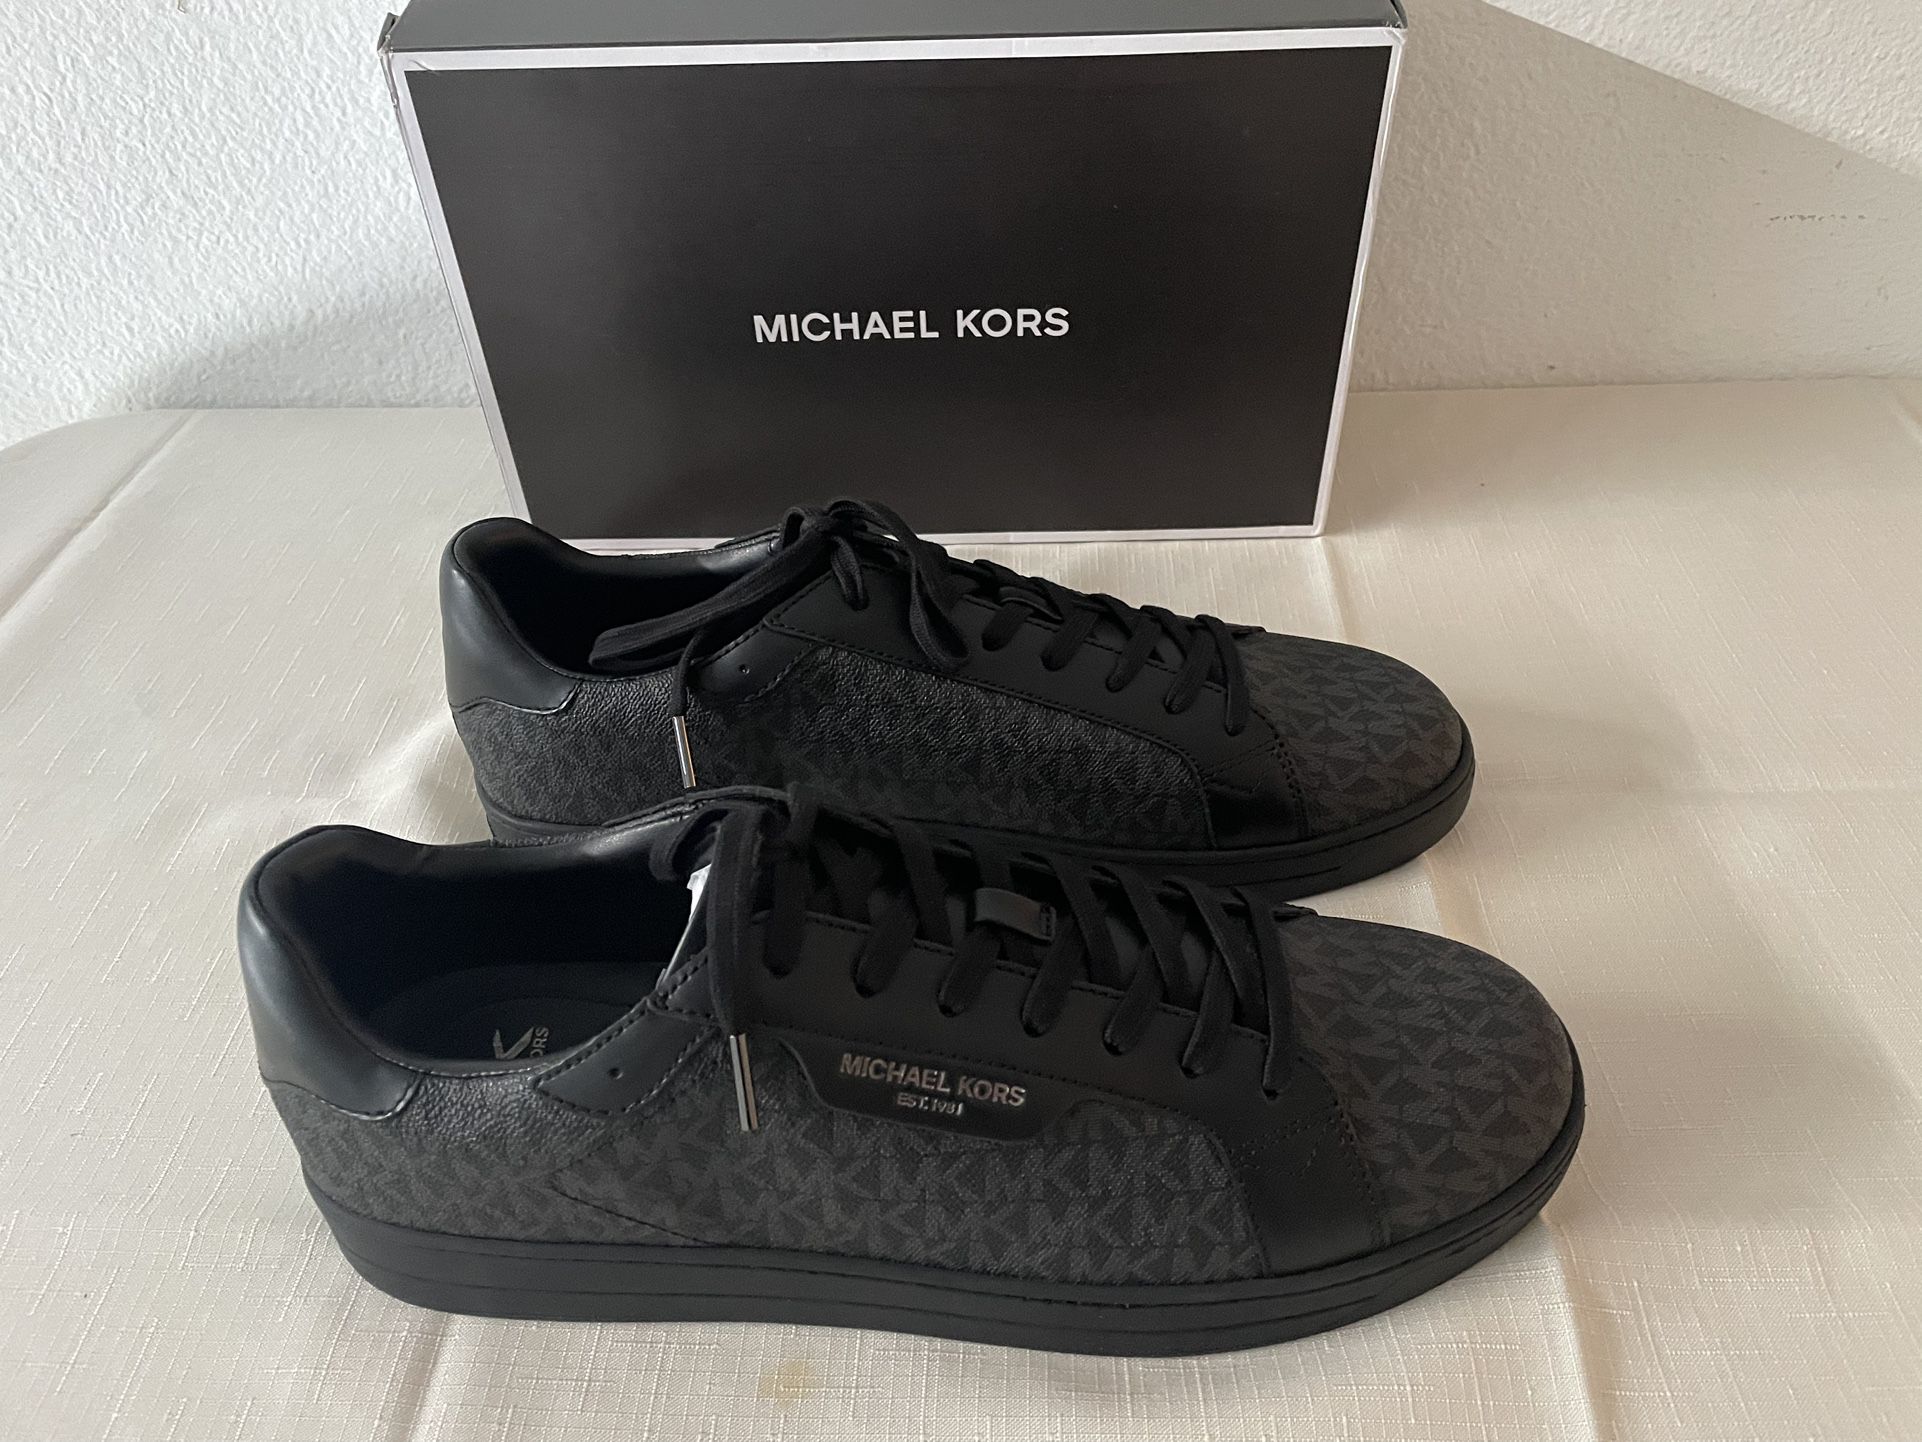 MICHAEL KORS KEATING LACE UP SHOES